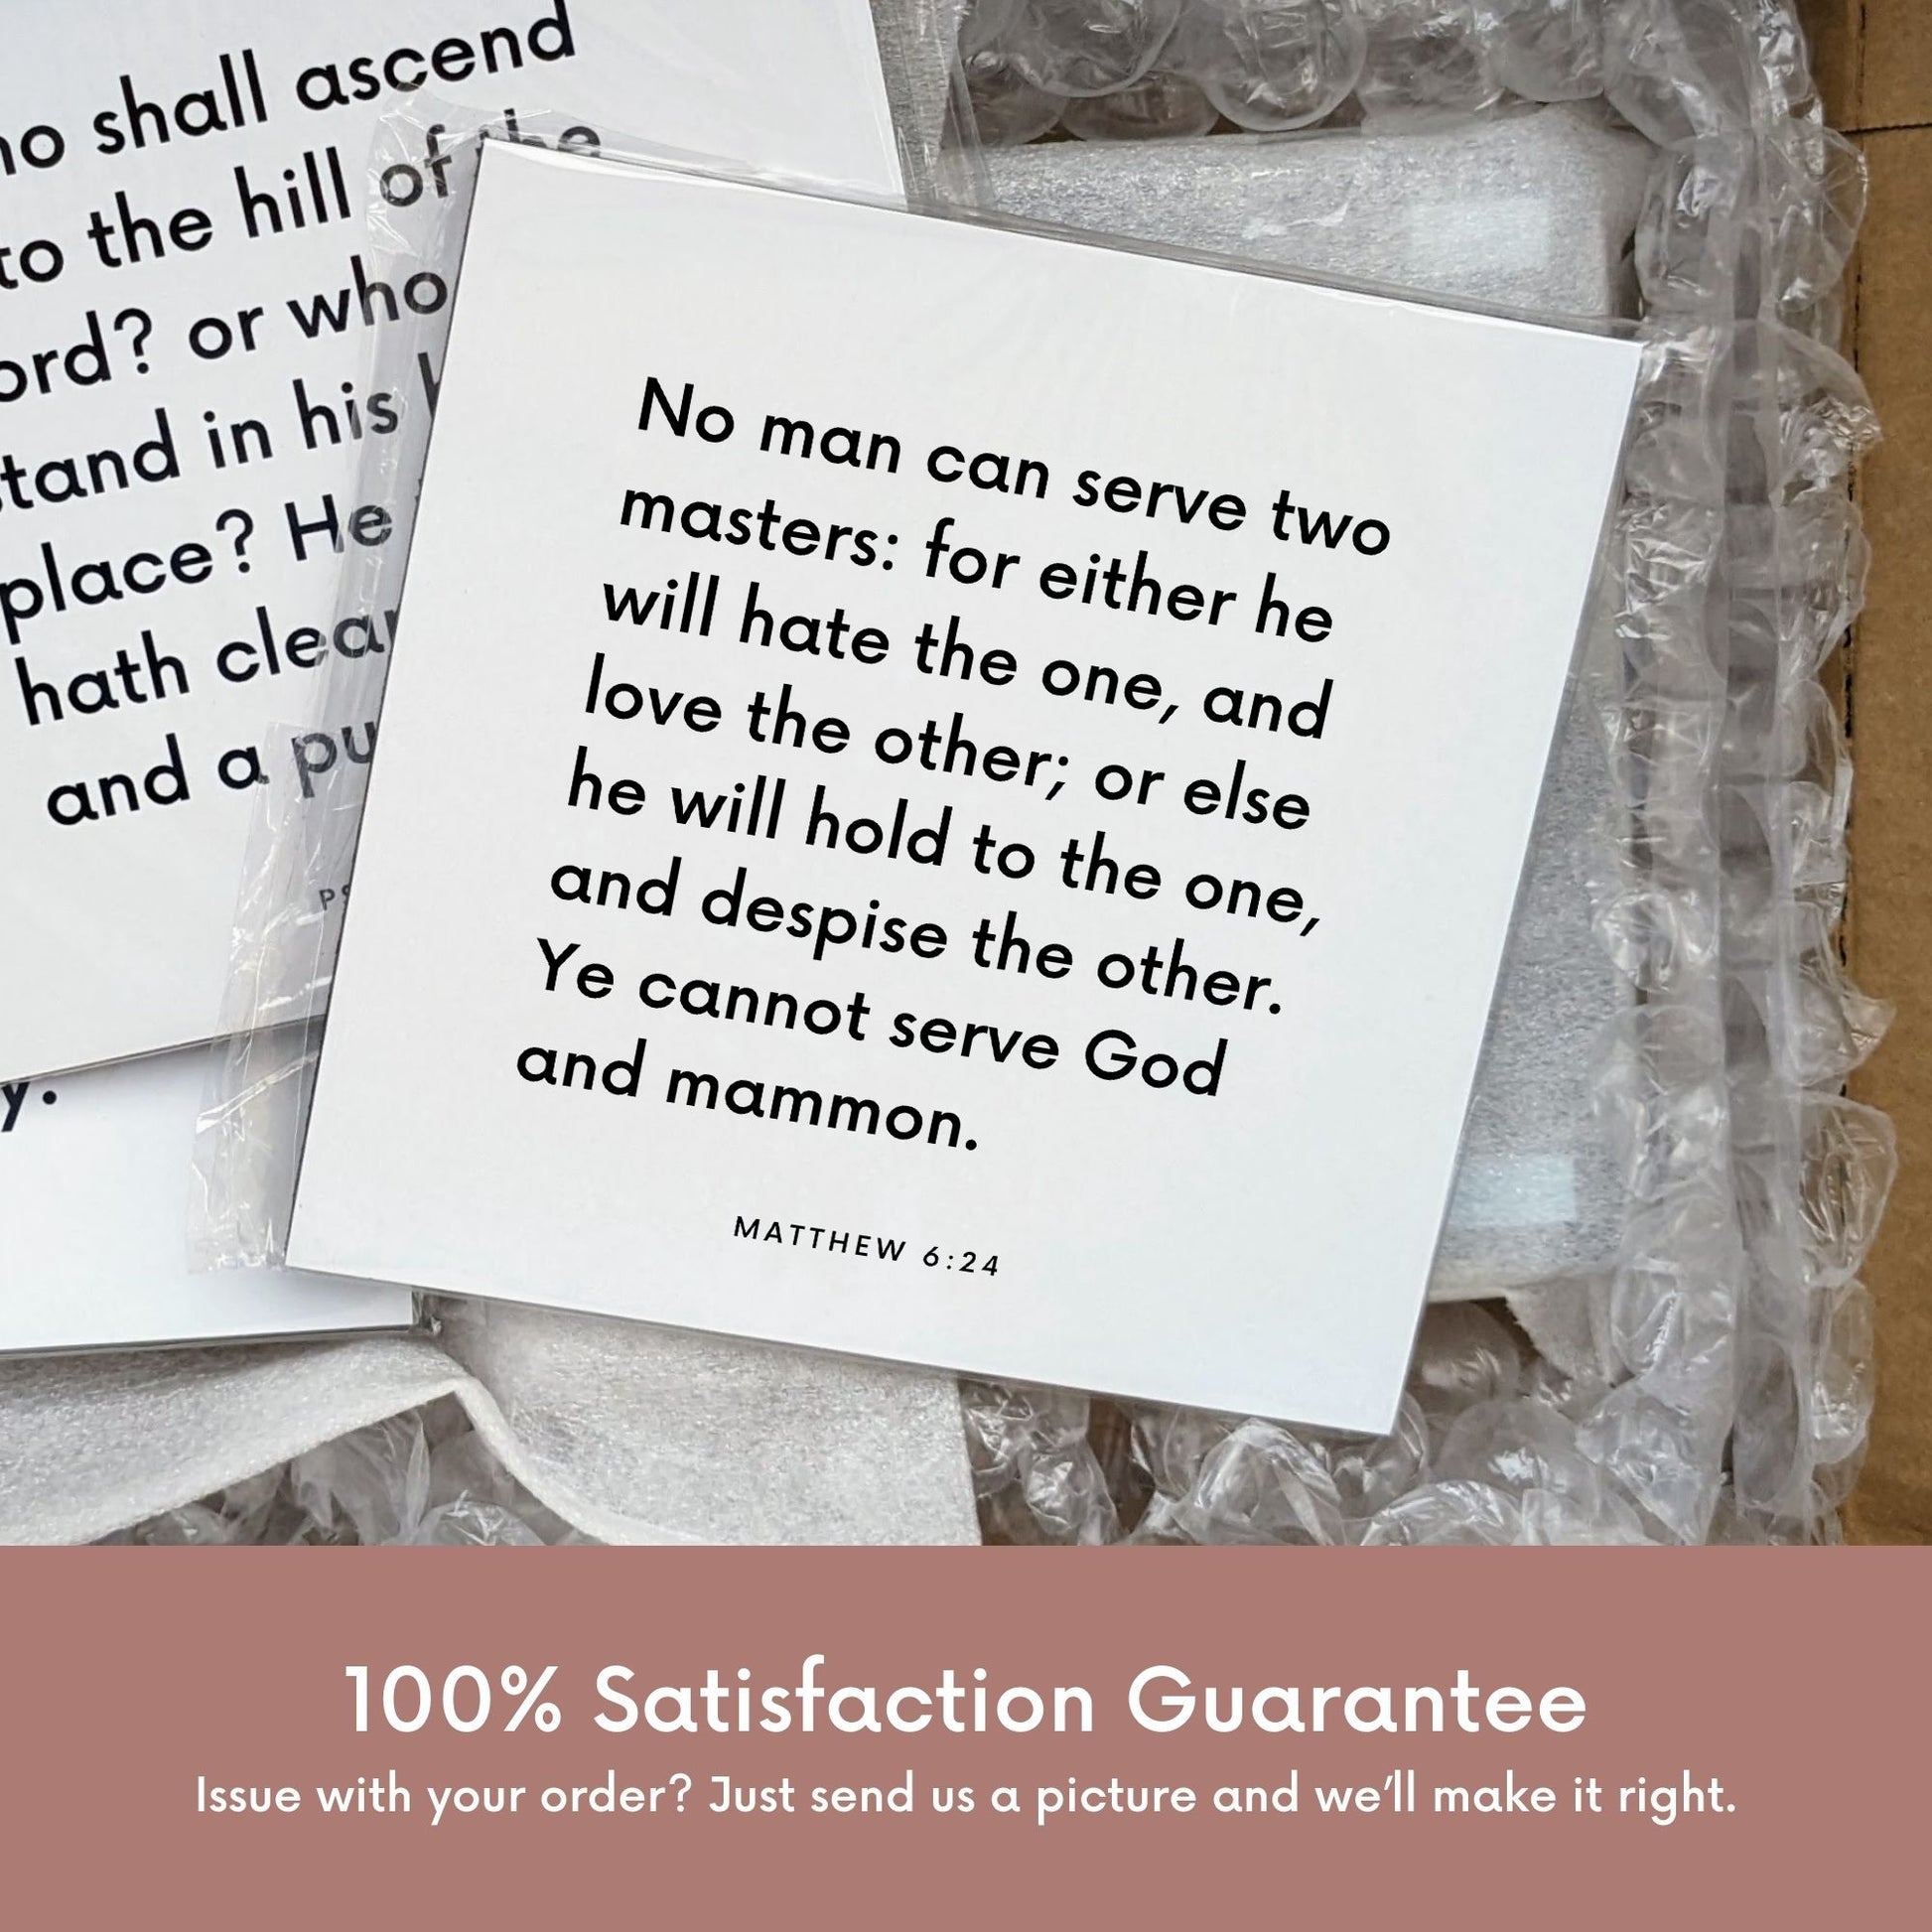 Shipping materials for scripture tile of Matthew 6:24 - "No man can serve two masters"